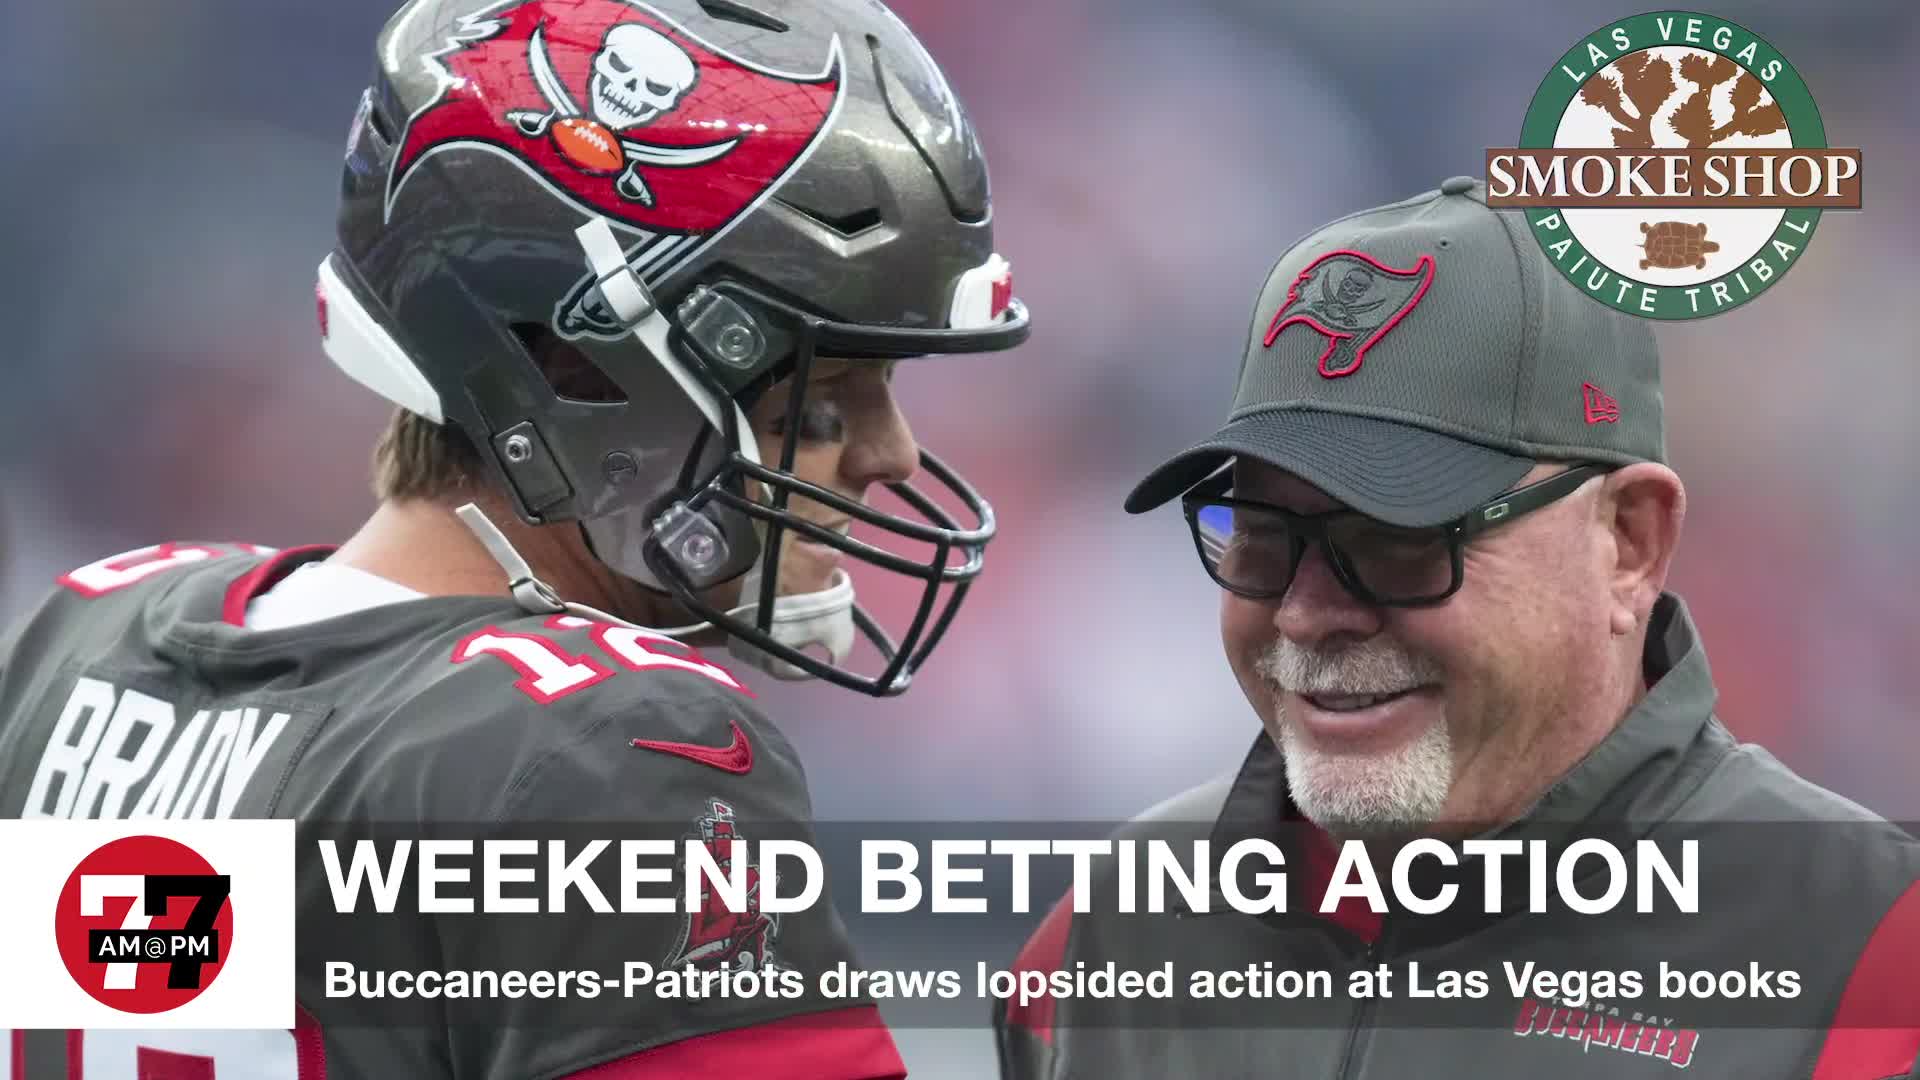 7@7PM NFL Weekend Betting Action